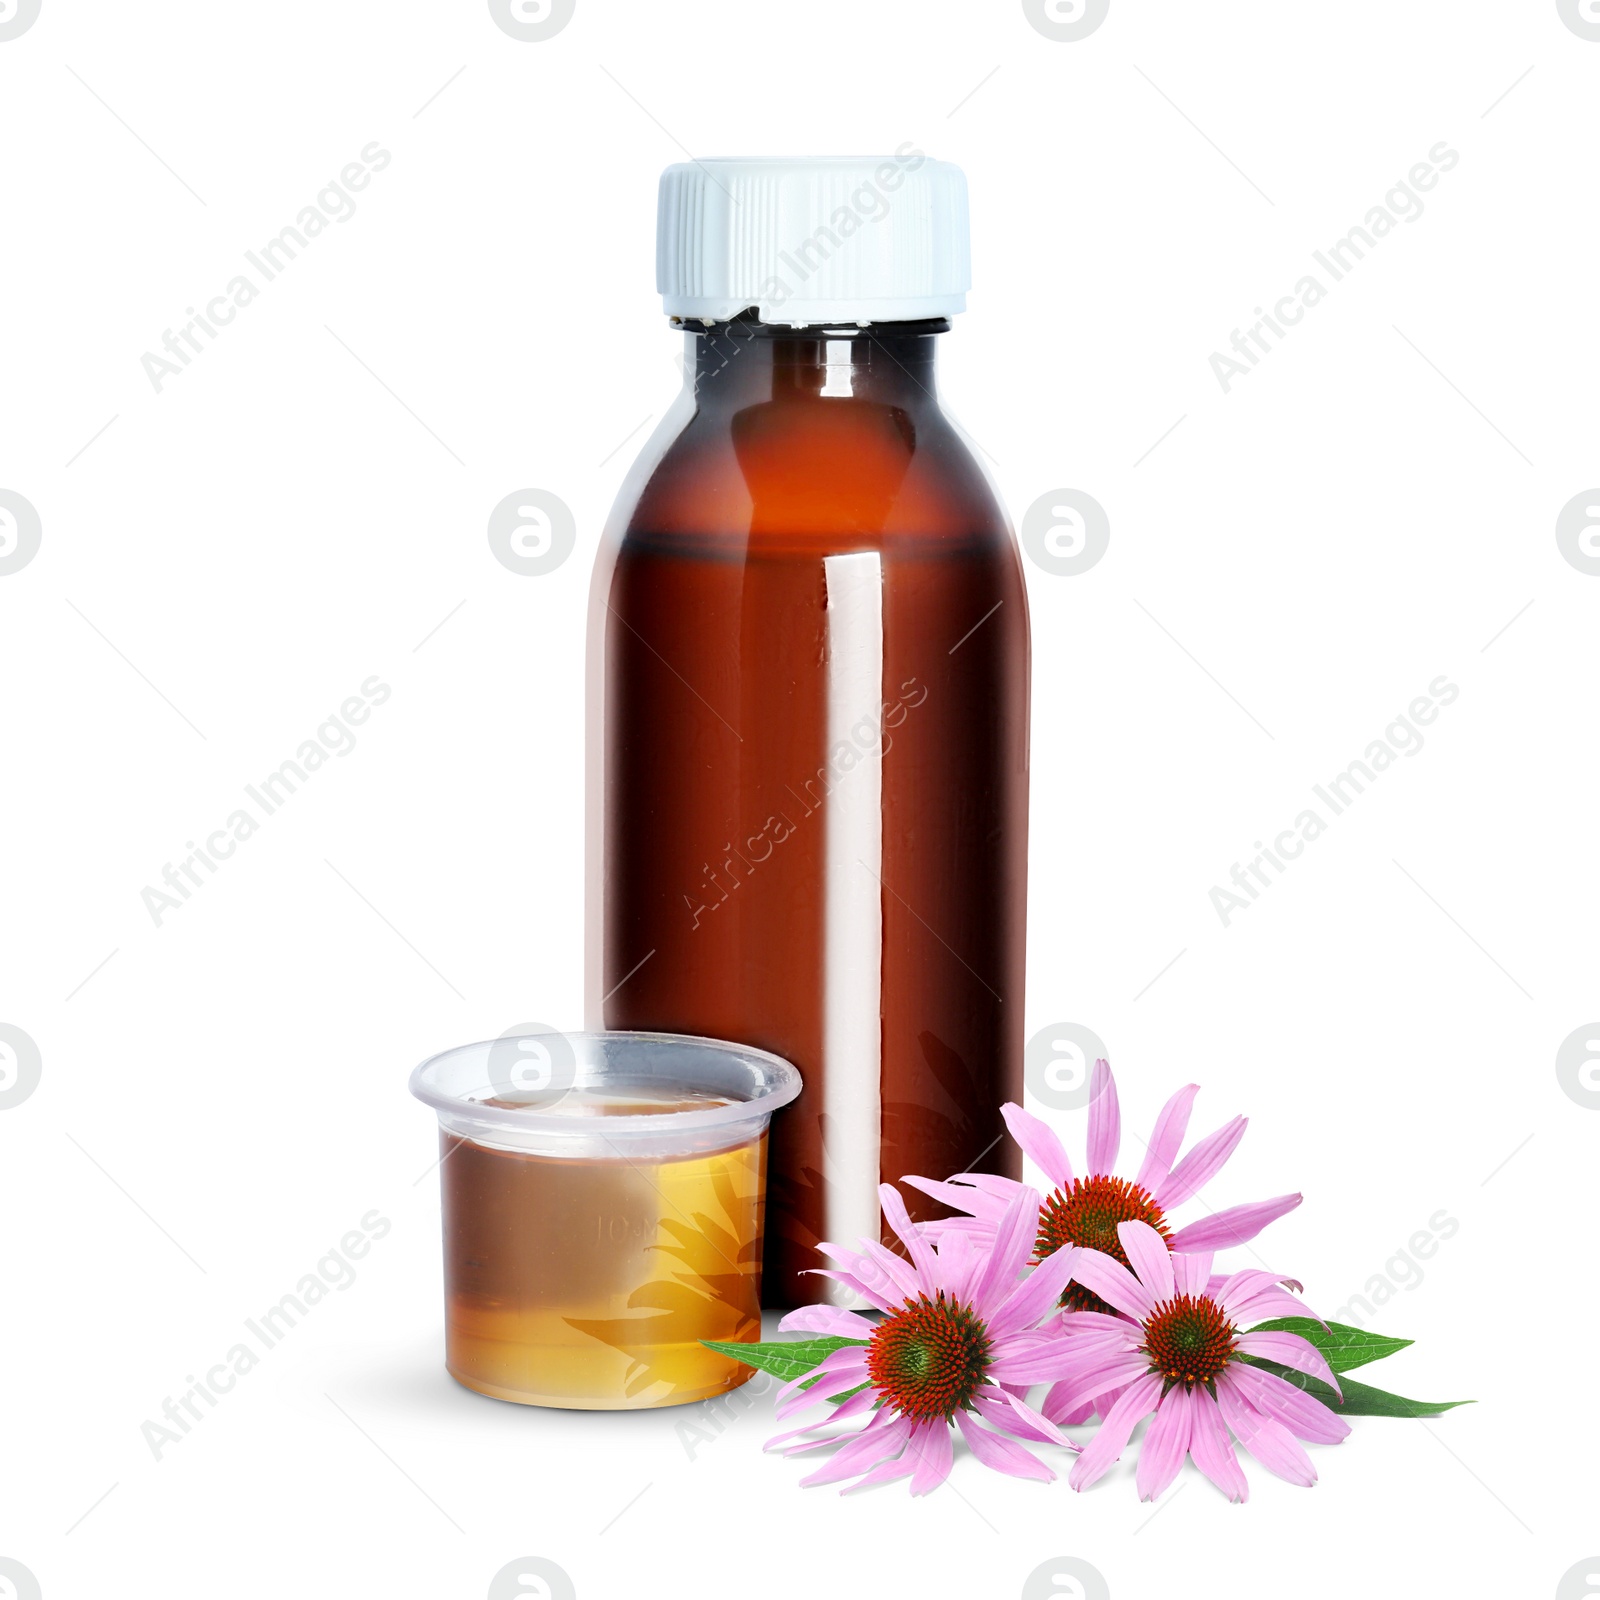 Image of Bottle of echinacea syrup and flowers on white background